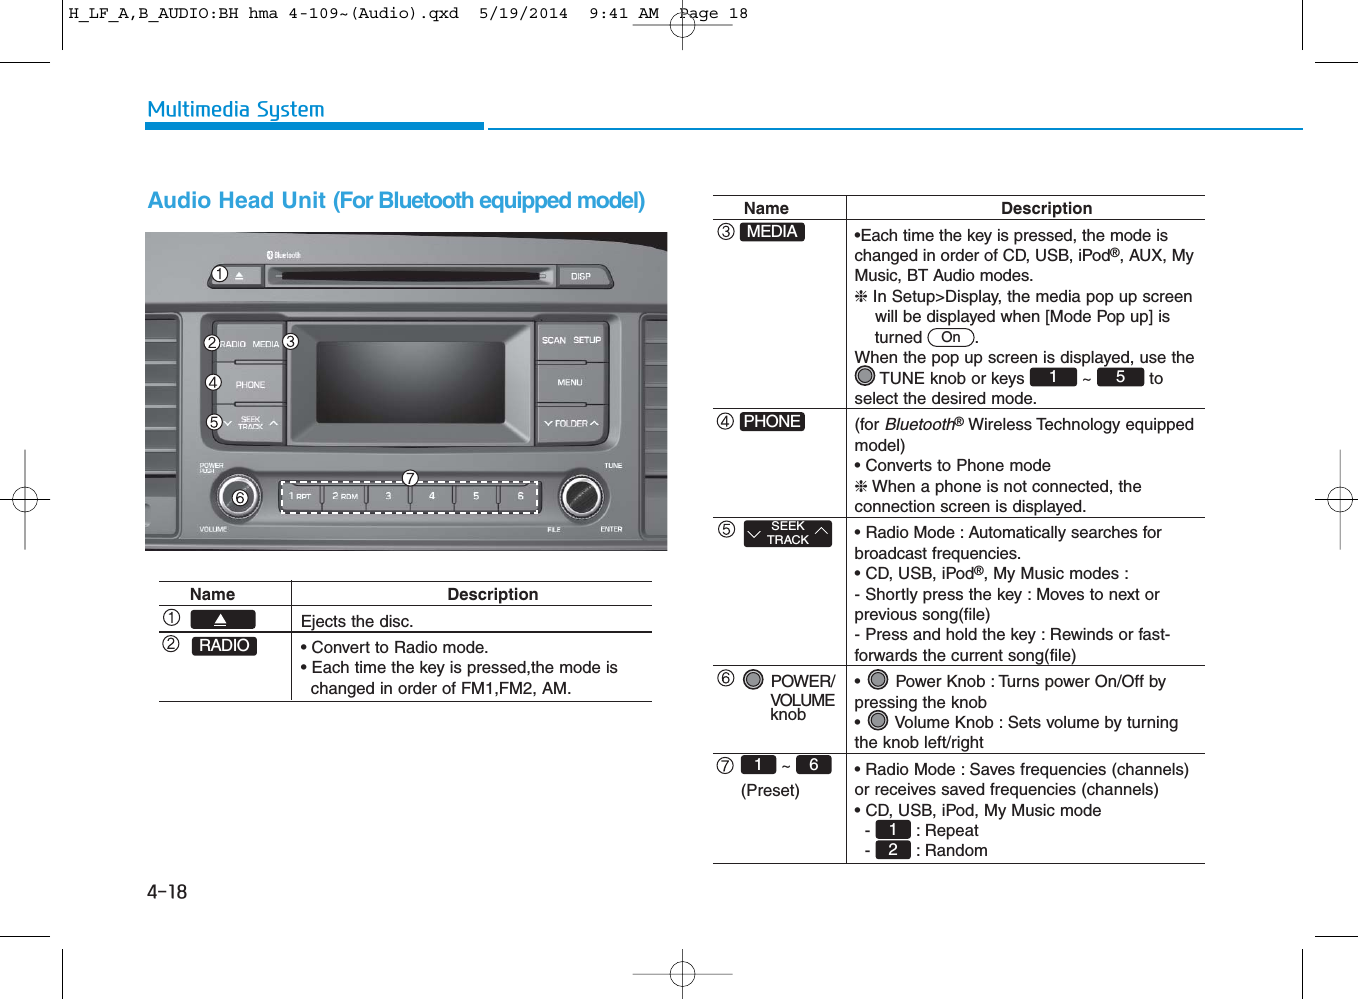 4-18Multimedia SystemAudio Head Unit (For Bluetooth equipped model)Name DescriptionEjects the disc.• Convert to Radio mode.• Each time the key is pressed,the mode is changed in order of FM1,FM2, AM.RADIOName Description•Each time the key is pressed, the mode is changed in order of CD, USB, iPod®, AUX, My Music, BT Audio modes.❈In Setup&gt;Display, the media pop up screen will be displayed when [Mode Pop up] is   turned .When the pop up screen is displayed, use the TUNE knob or keys  ~  to select the desired mode.(for Bluetooth®Wireless Technology equippedmodel)• Converts to Phone mode❈When a phone is not connected, the connection screen is displayed.• Radio Mode : Automatically searches for broadcast frequencies.• CD, USB, iPod®, My Music modes :- Shortly press the key : Moves to next or previous song(file)- Press and hold the key : Rewinds or fast-forwards the current song(file)•  Power Knob : Turns power On/Off by pressing the knob•  Volume Knob : Sets volume by turning the knob left/right• Radio Mode : Saves frequencies (channels) or receives saved frequencies (channels)• CD, USB, iPod, My Music mode- : Repeat- : RandomSEEKTRACKPHONEMEDIA2151OnPOWER/ VOLUMEknob~ (Preset)61H_LF_A,B_AUDIO:BH hma 4-109~(Audio).qxd  5/19/2014  9:41 AM  Page 18